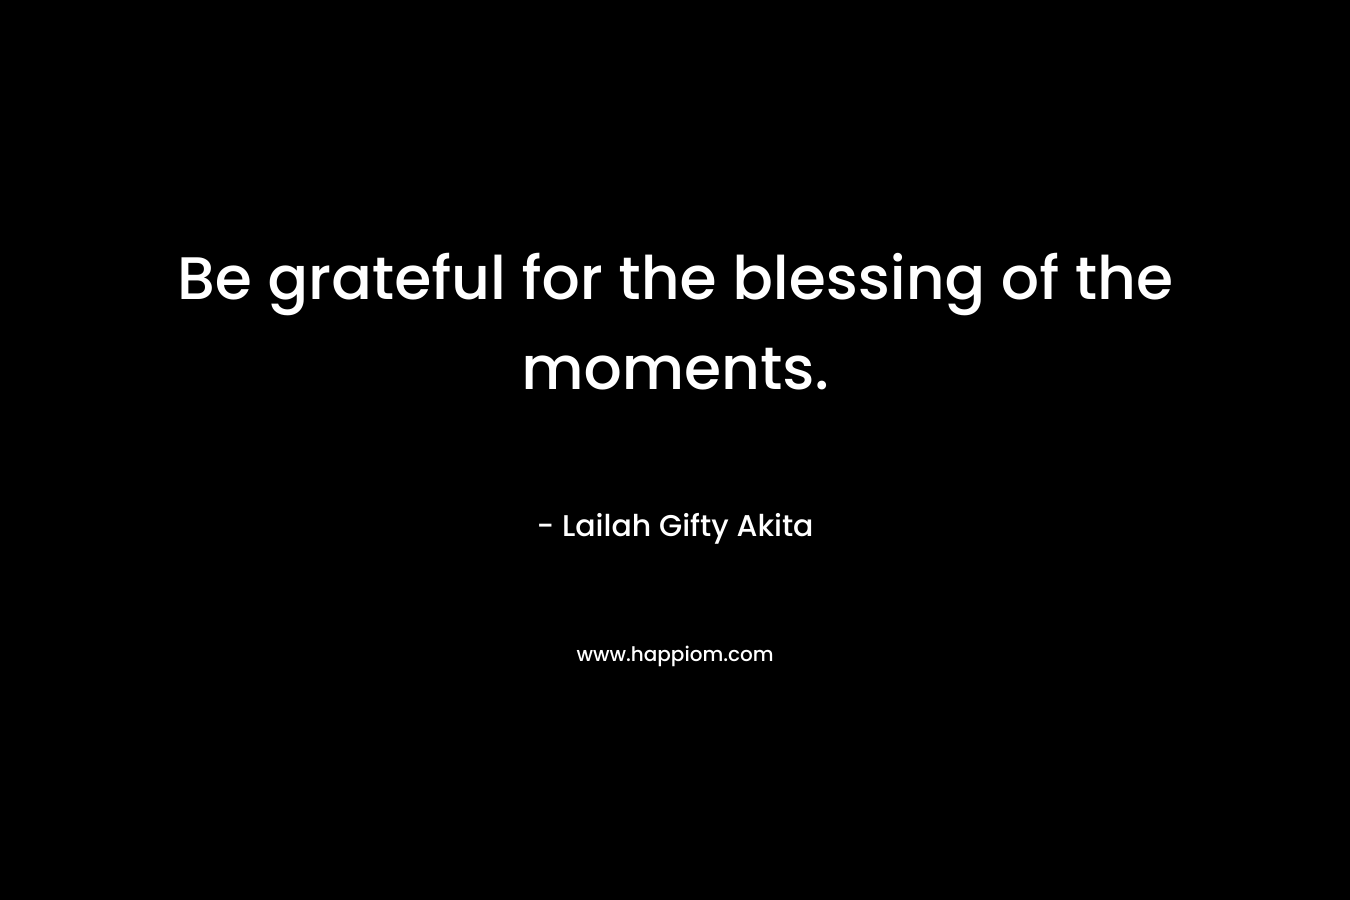 Be grateful for the blessing of the moments.